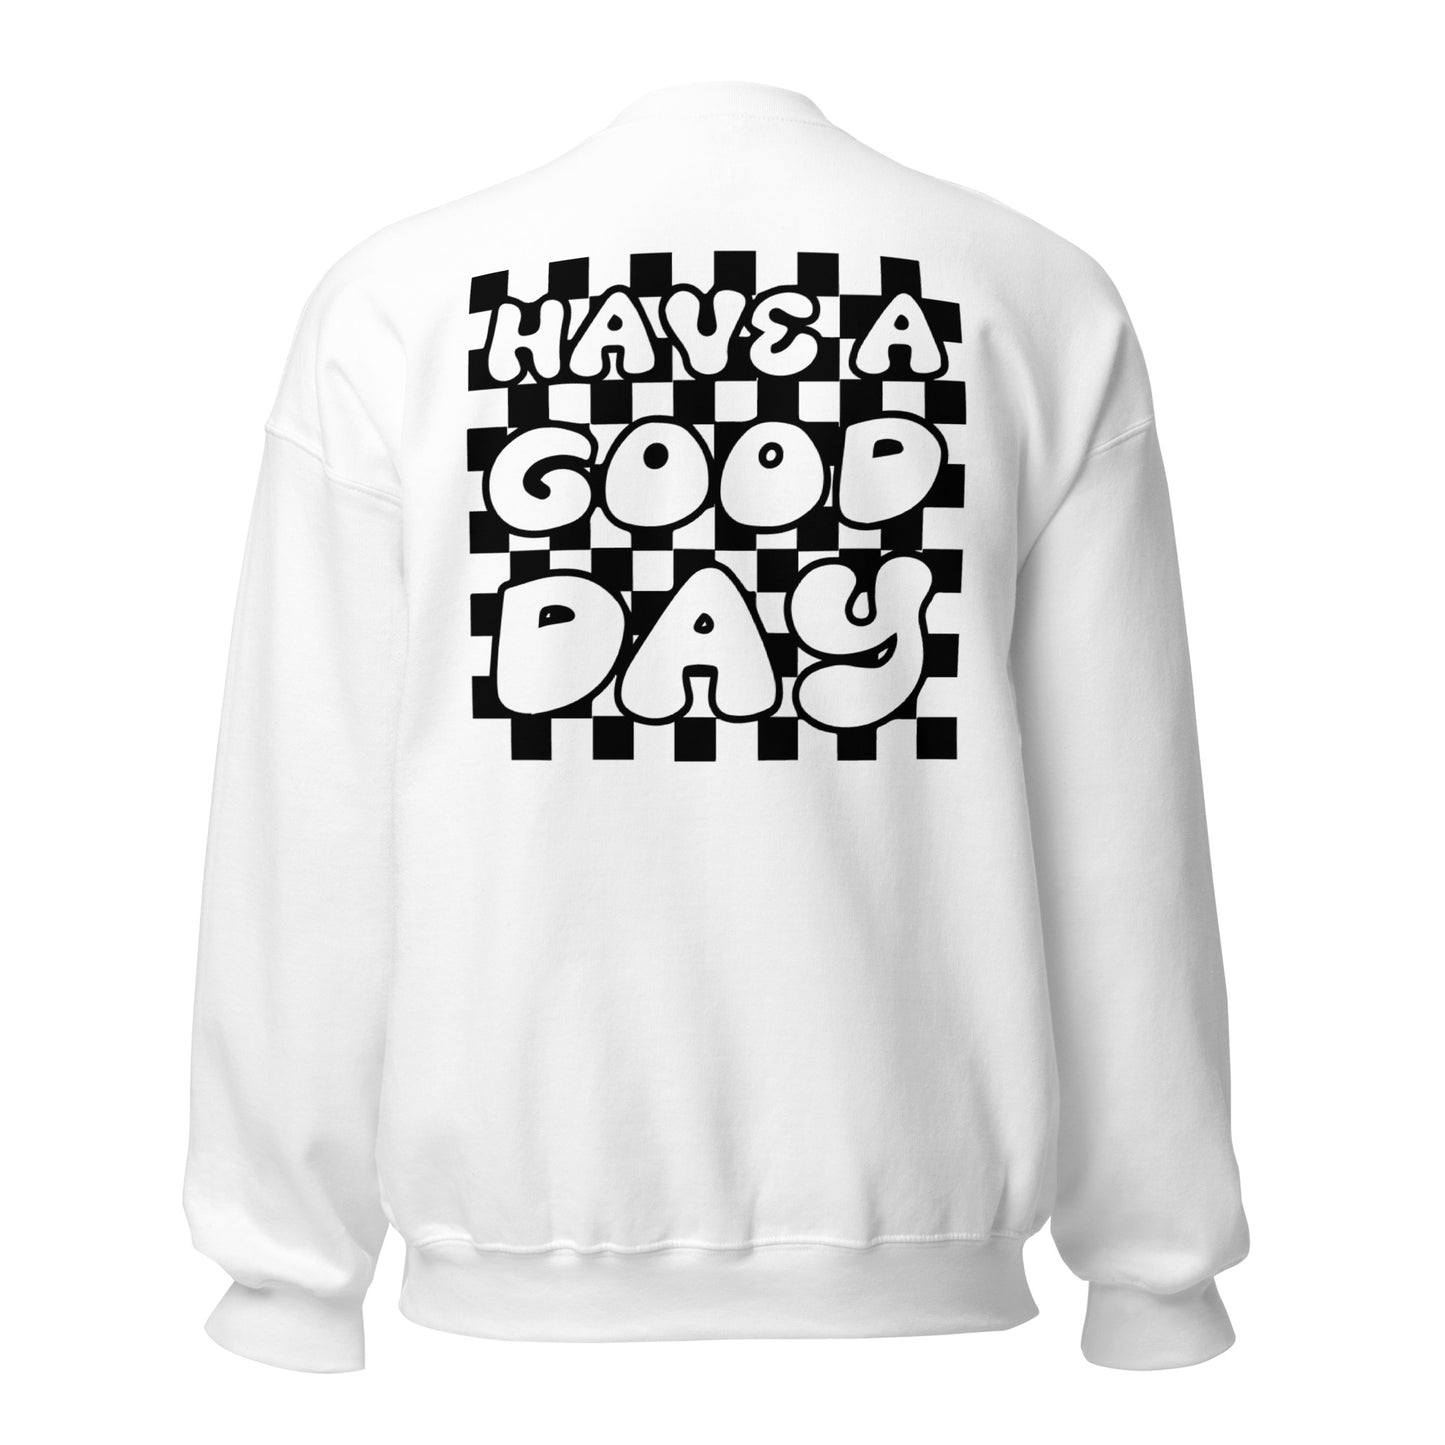 Men's Smiley Face t-shirt with "Have A Good Day" on back